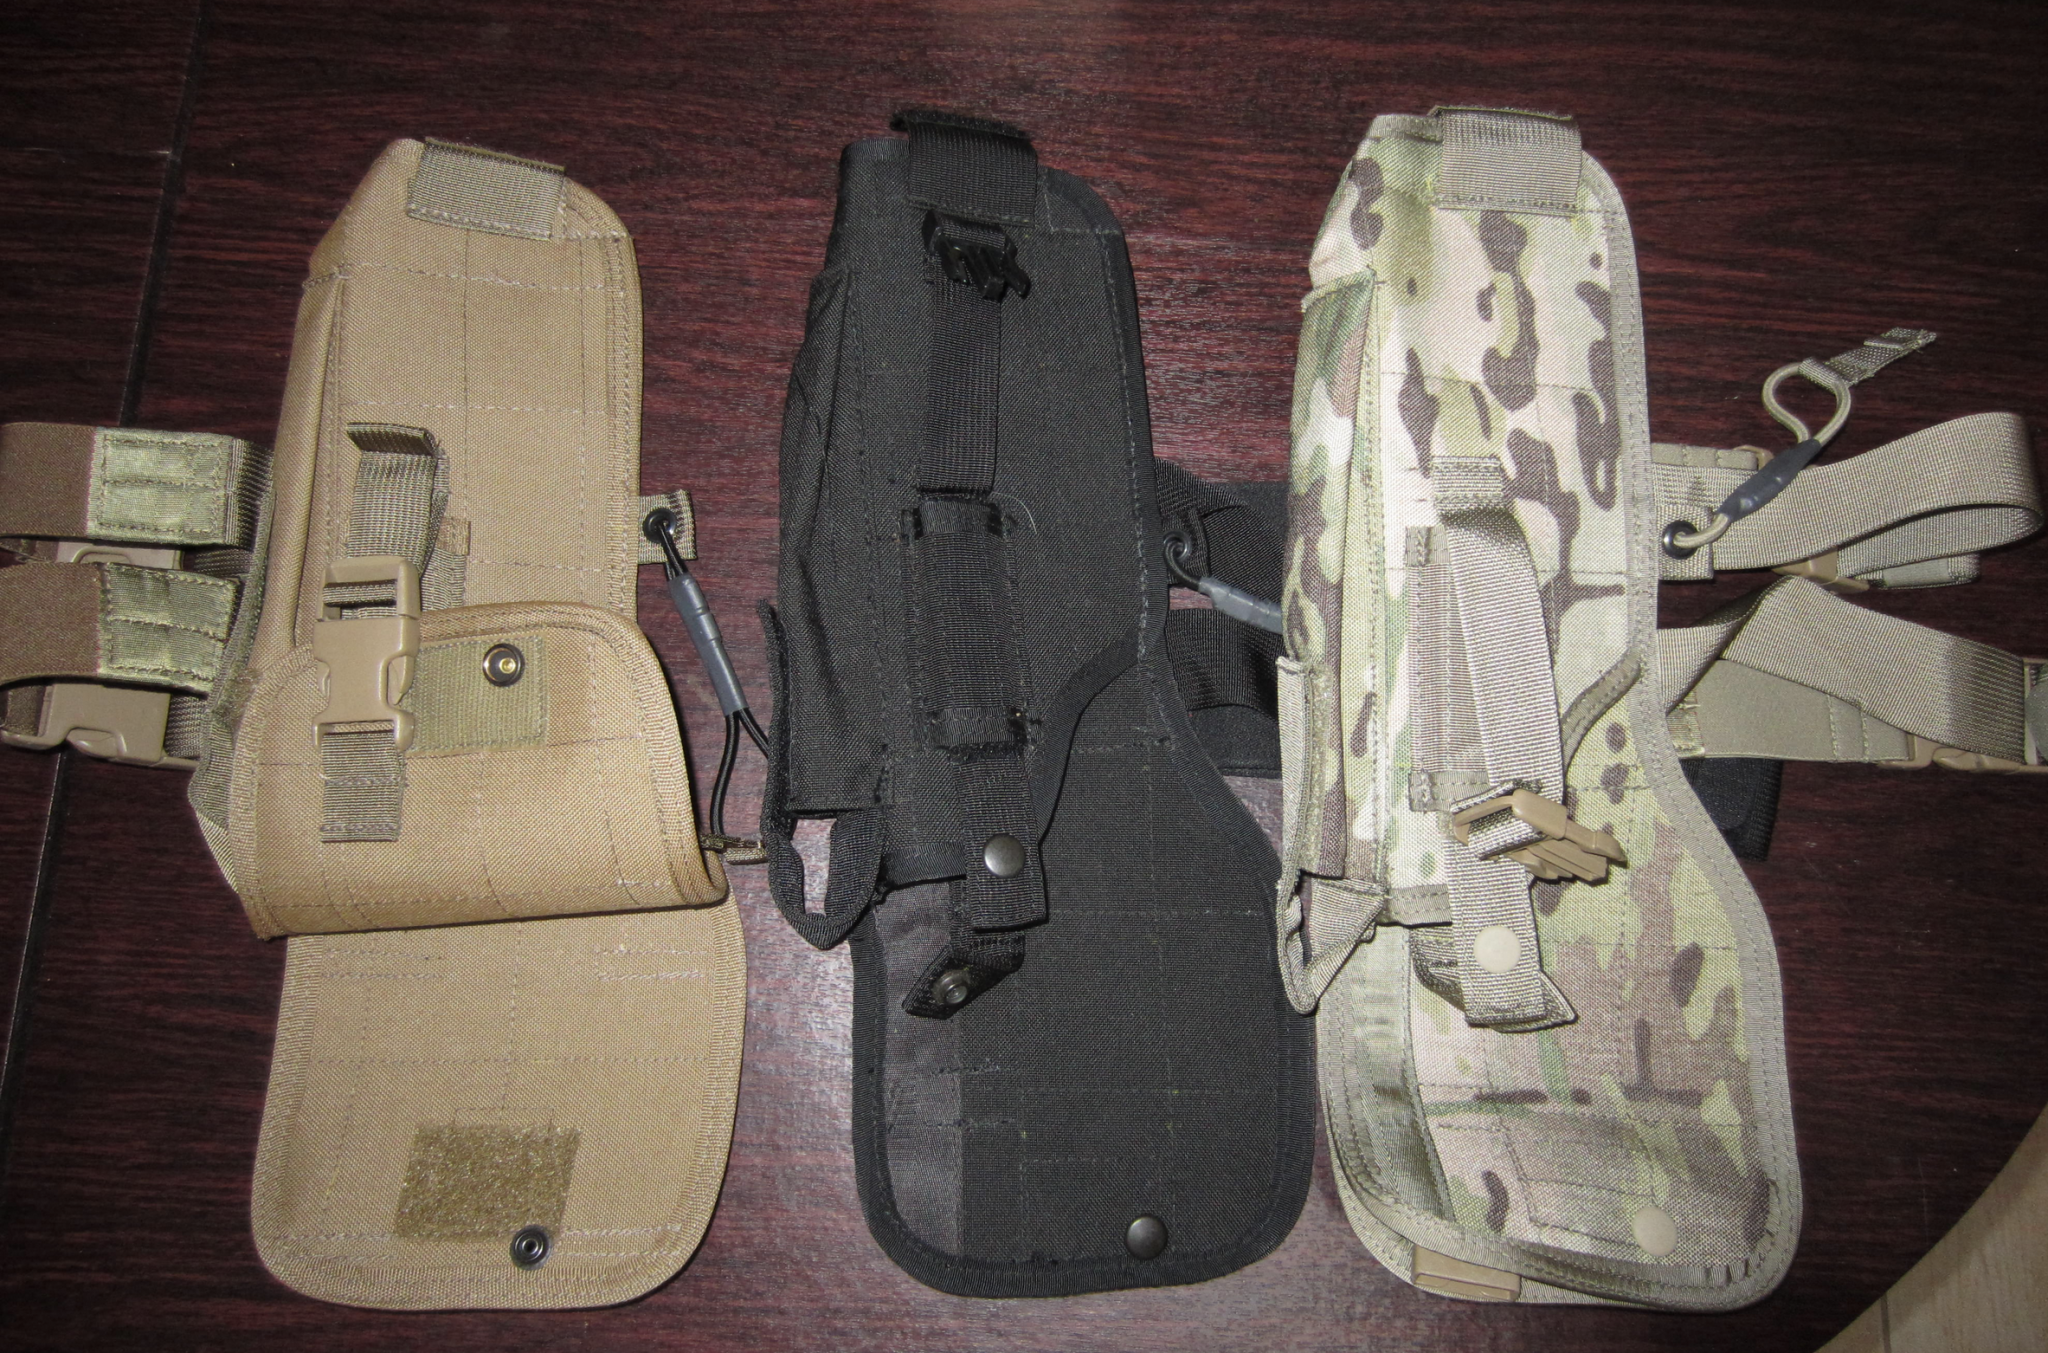 HK Mark 23 Canvas Holster Photos copy.png